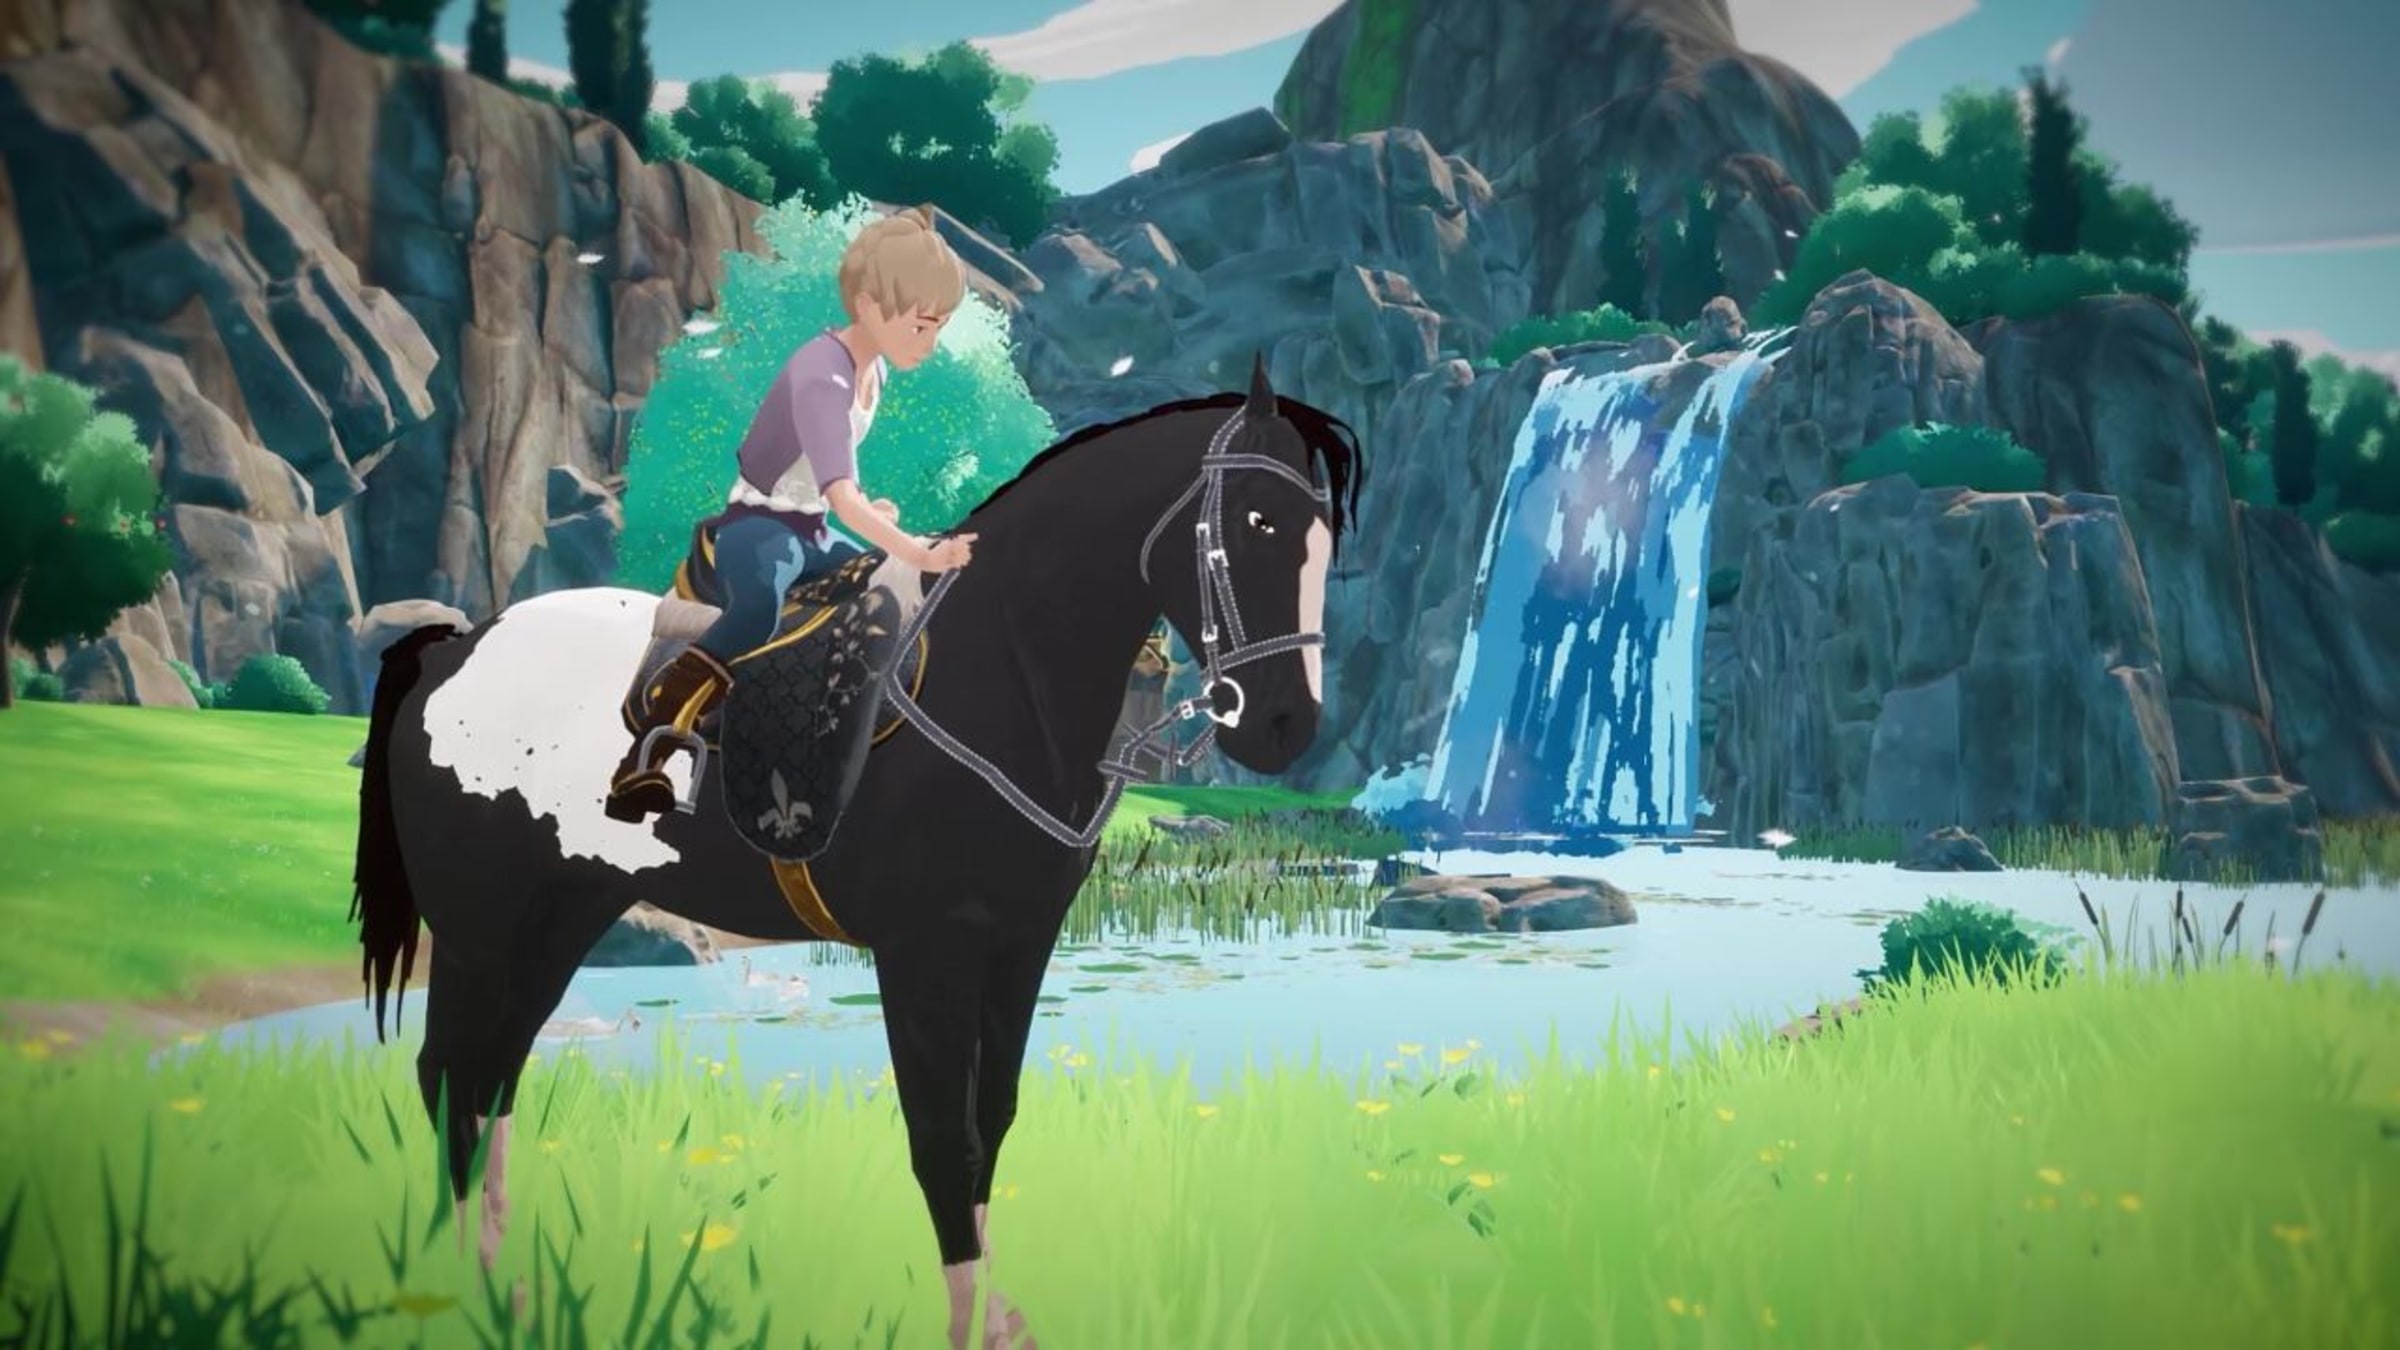 https://assets.nintendo.com/image/upload/c_fill,w_1200/q_auto:best/f_auto/dpr_2.0/ncom/en_US/games/switch/h/horse-tales-emerald-valley-ranch-switch/